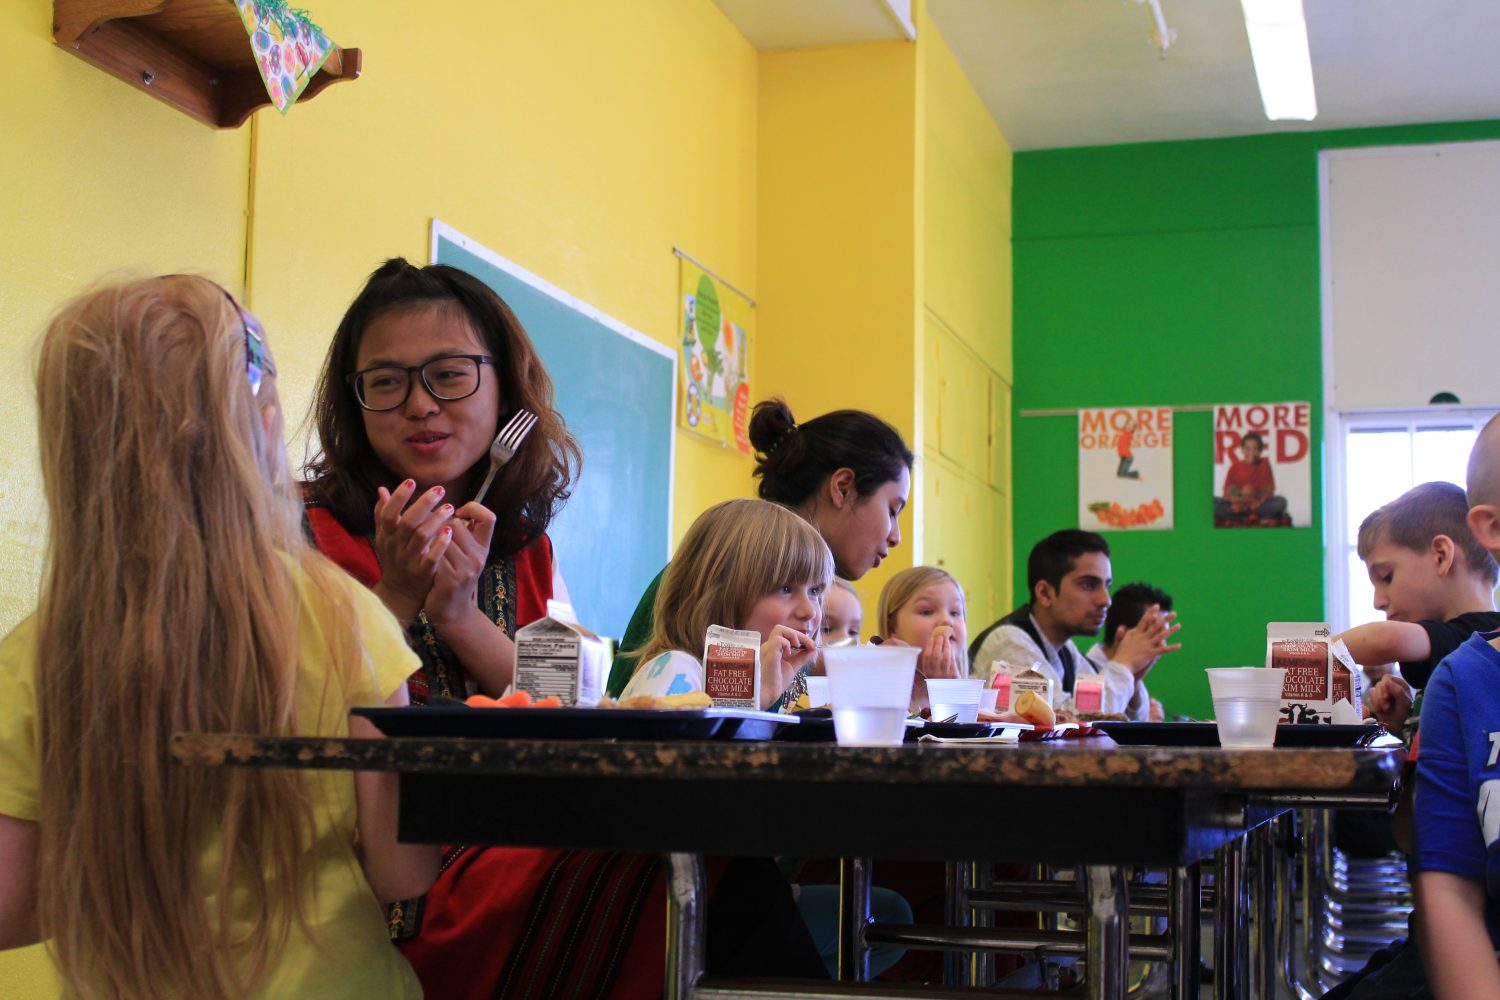 International students take a lunch break with elementary school students during the expo.
Sarah Pickar/Winonan